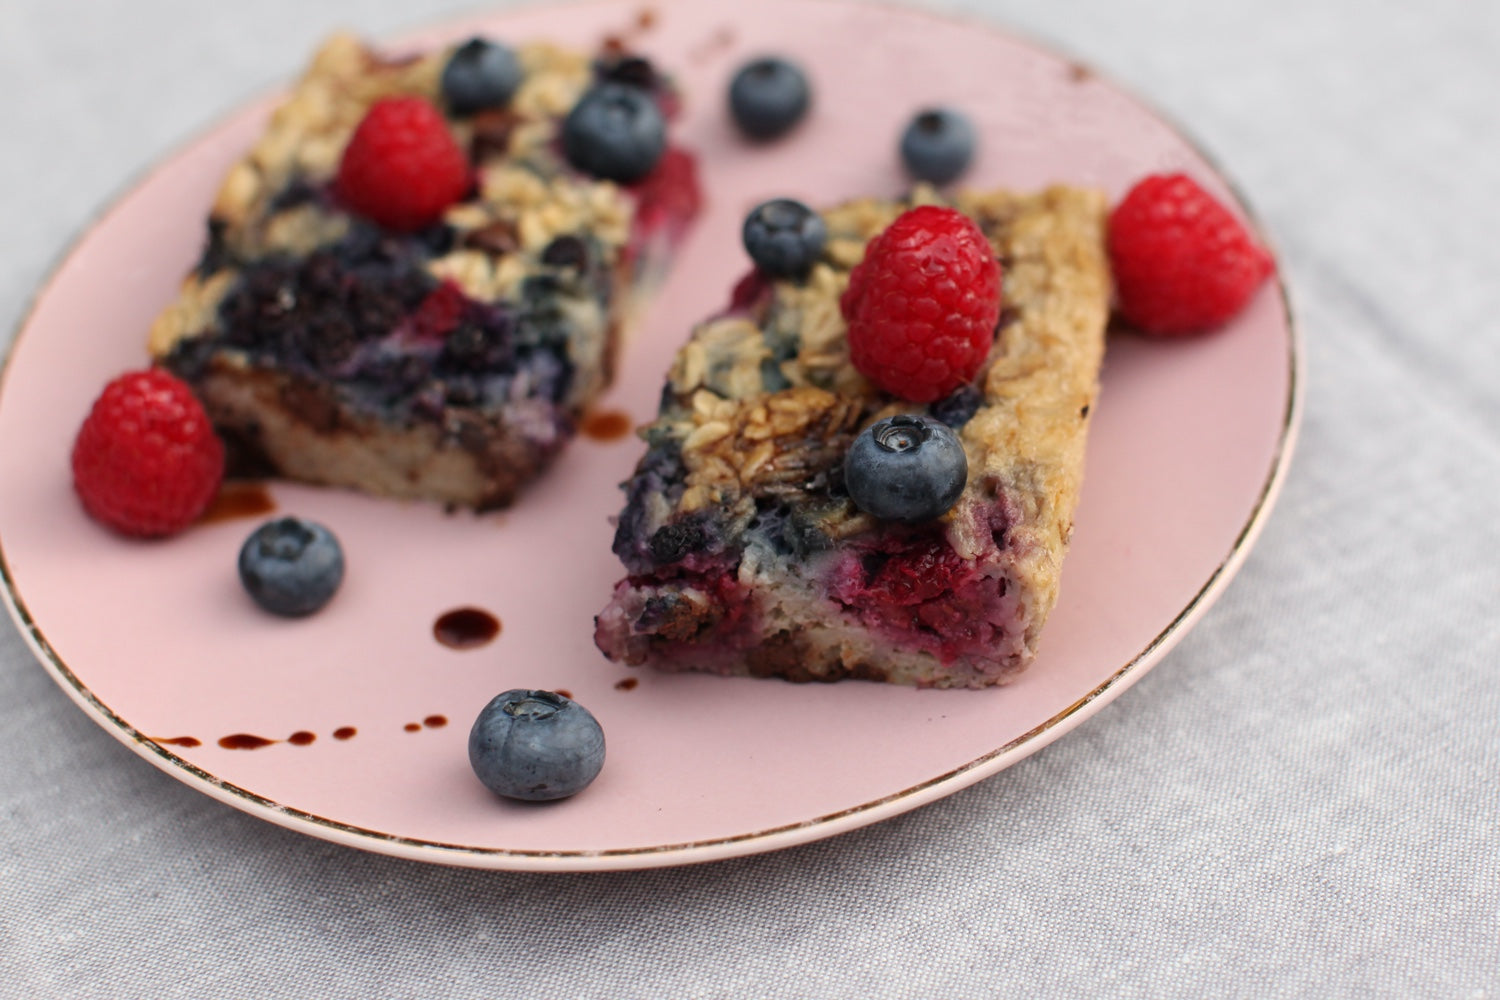 Baked Oatmeal with Wild Berries